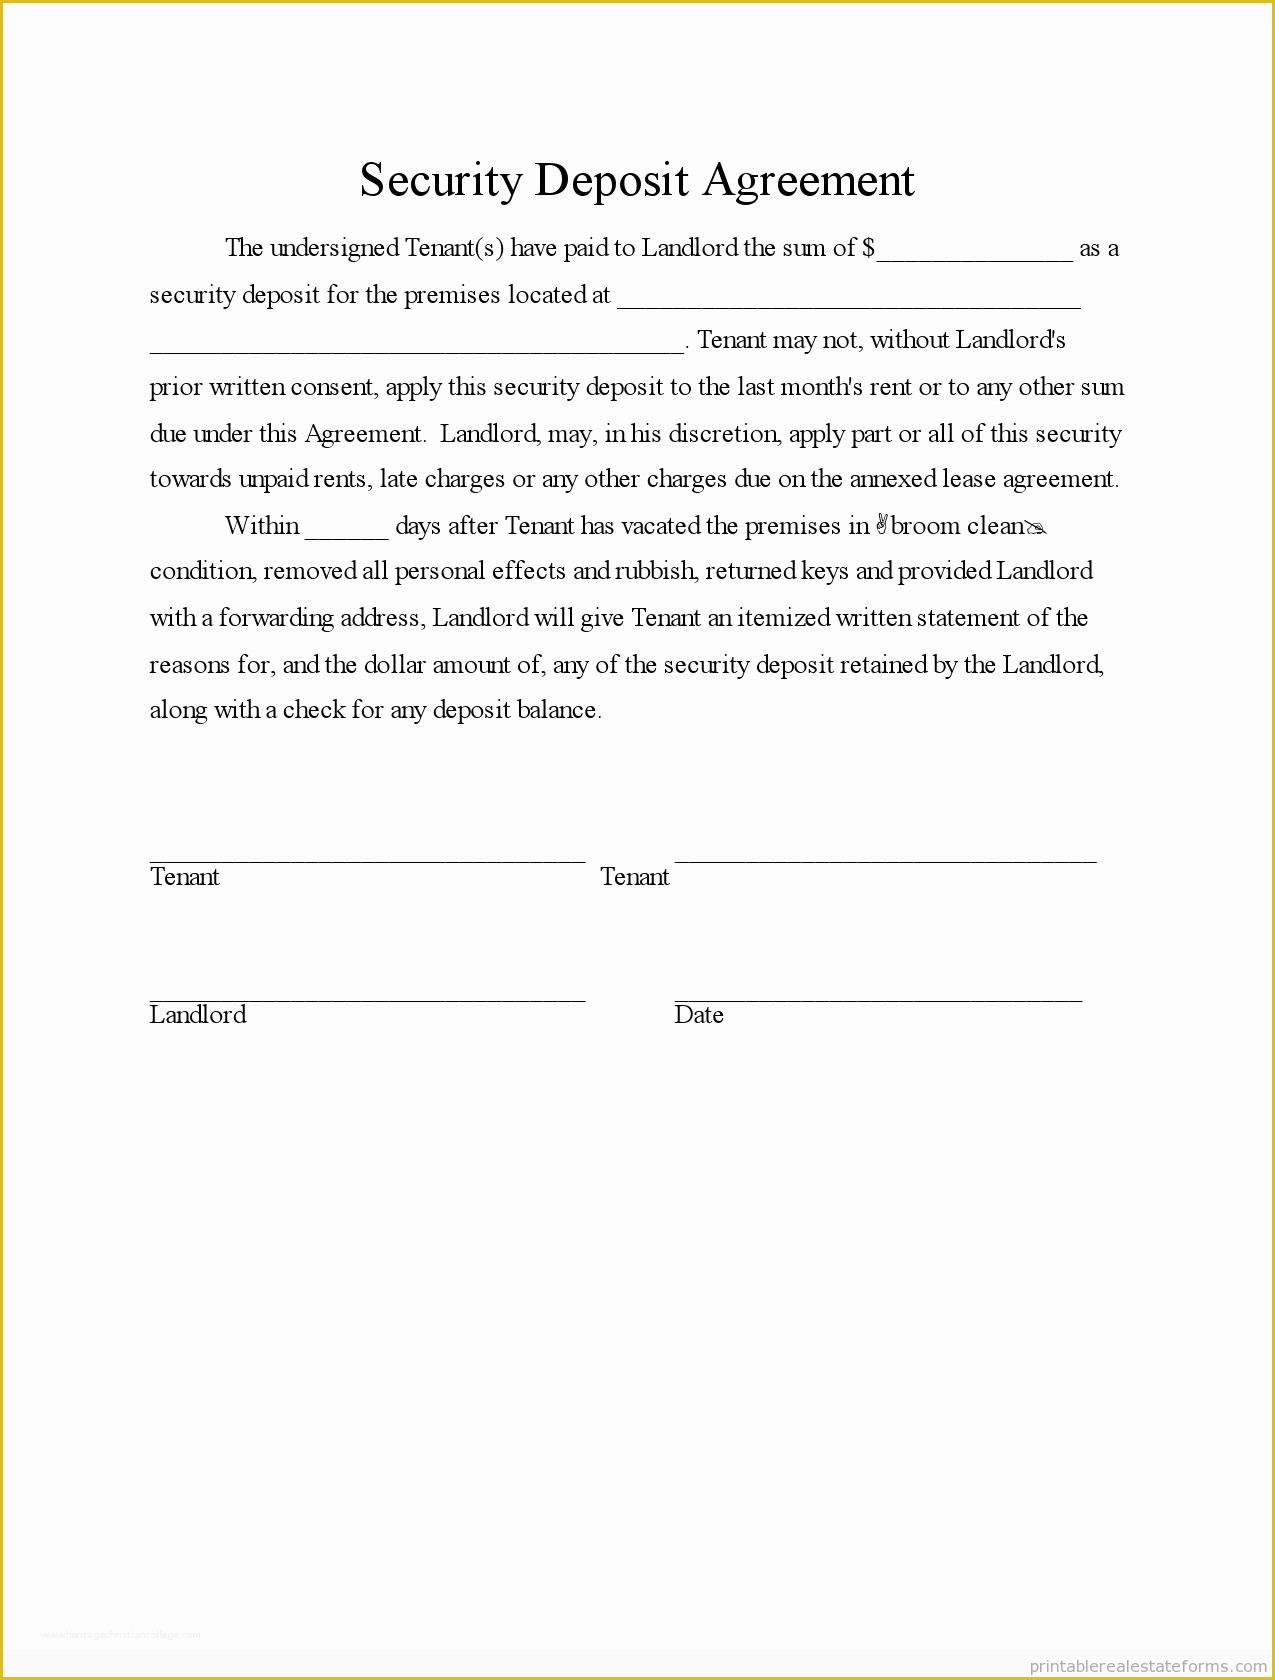 Sale or Return Agreement Template Free Of Printable Security Deposit Agreement 3 Template 2015